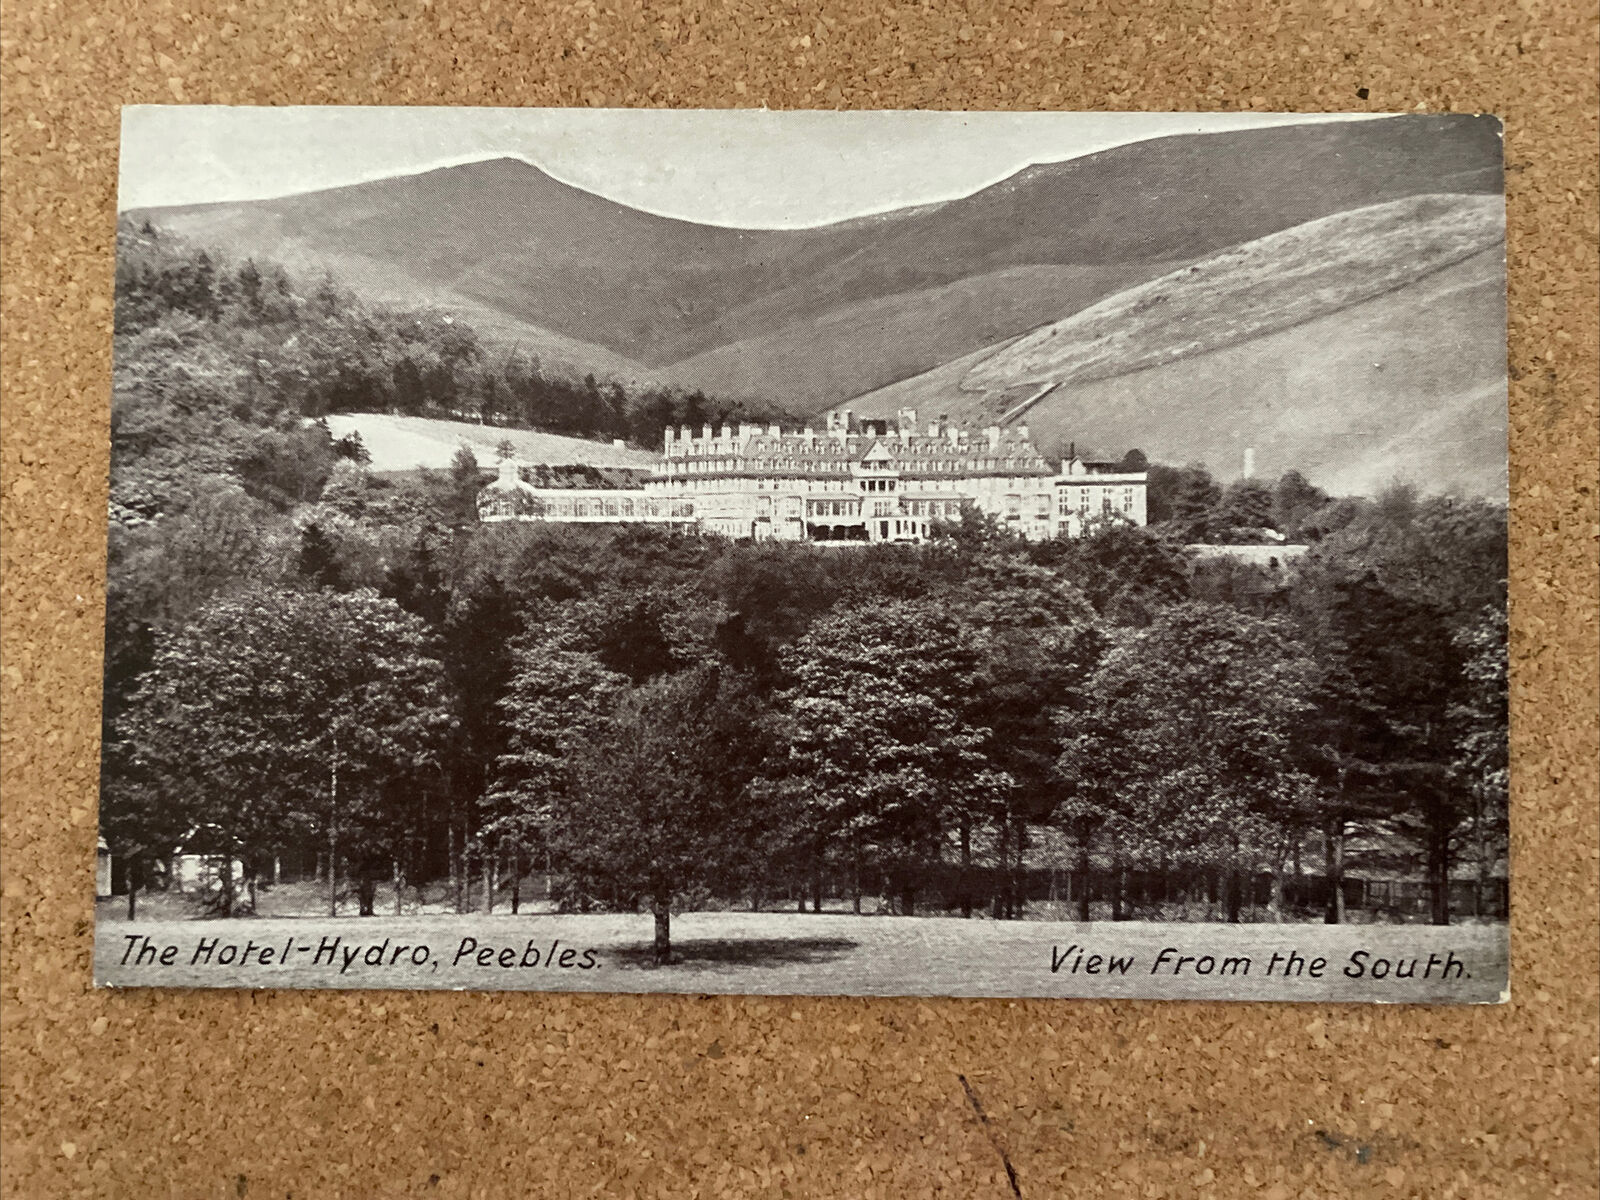 House Clearance - The Hotel-Hydro, Peebles, View from the South